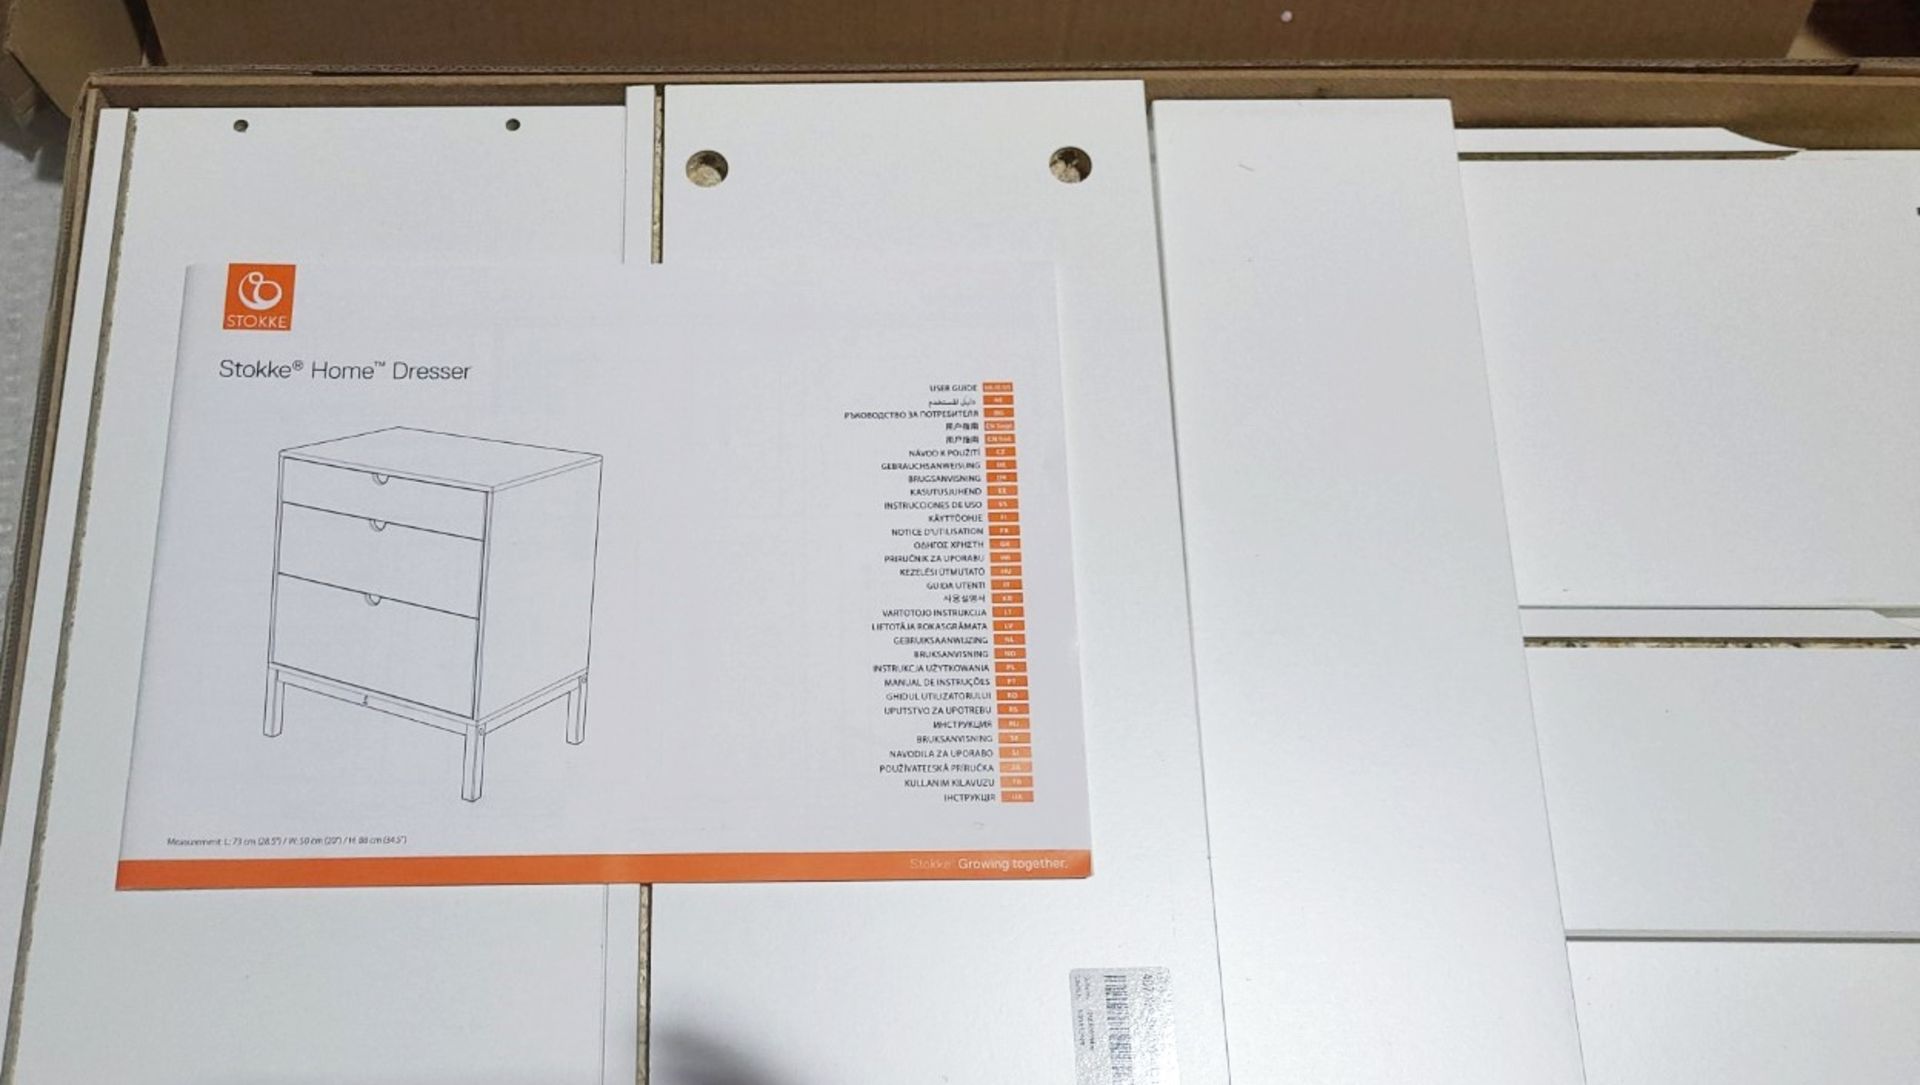 1 x STOKKE White Three Drawer Beechwood And MDF Home Dresser *Comes In 2 Boxes - Image 2 of 5